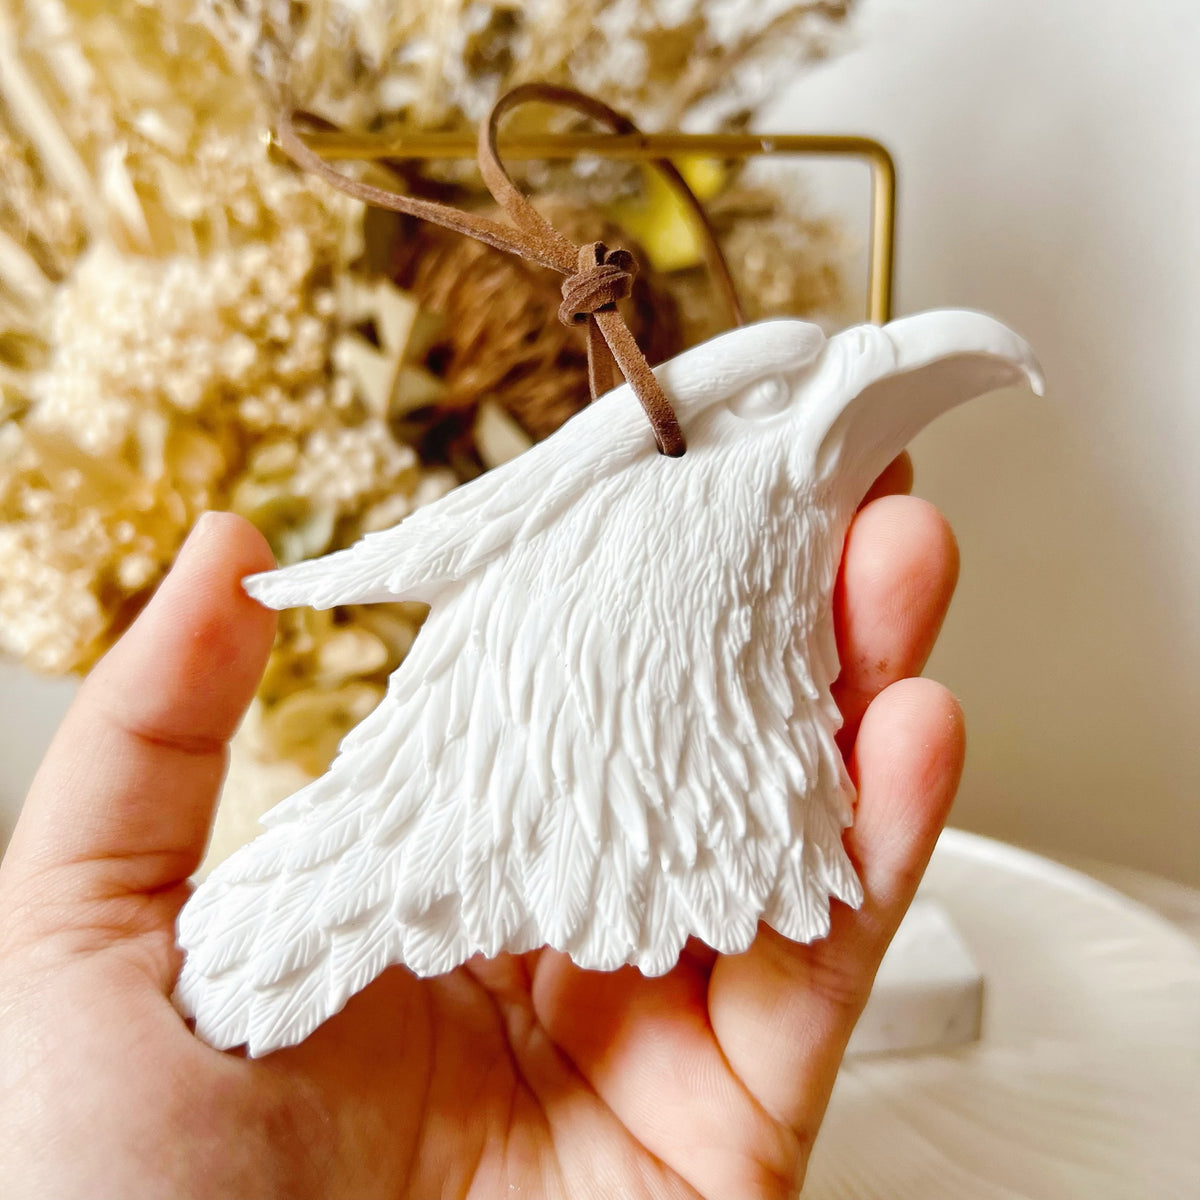 Eagle Home Hanging Diffuser - Home Fragrances | LMJ Candles